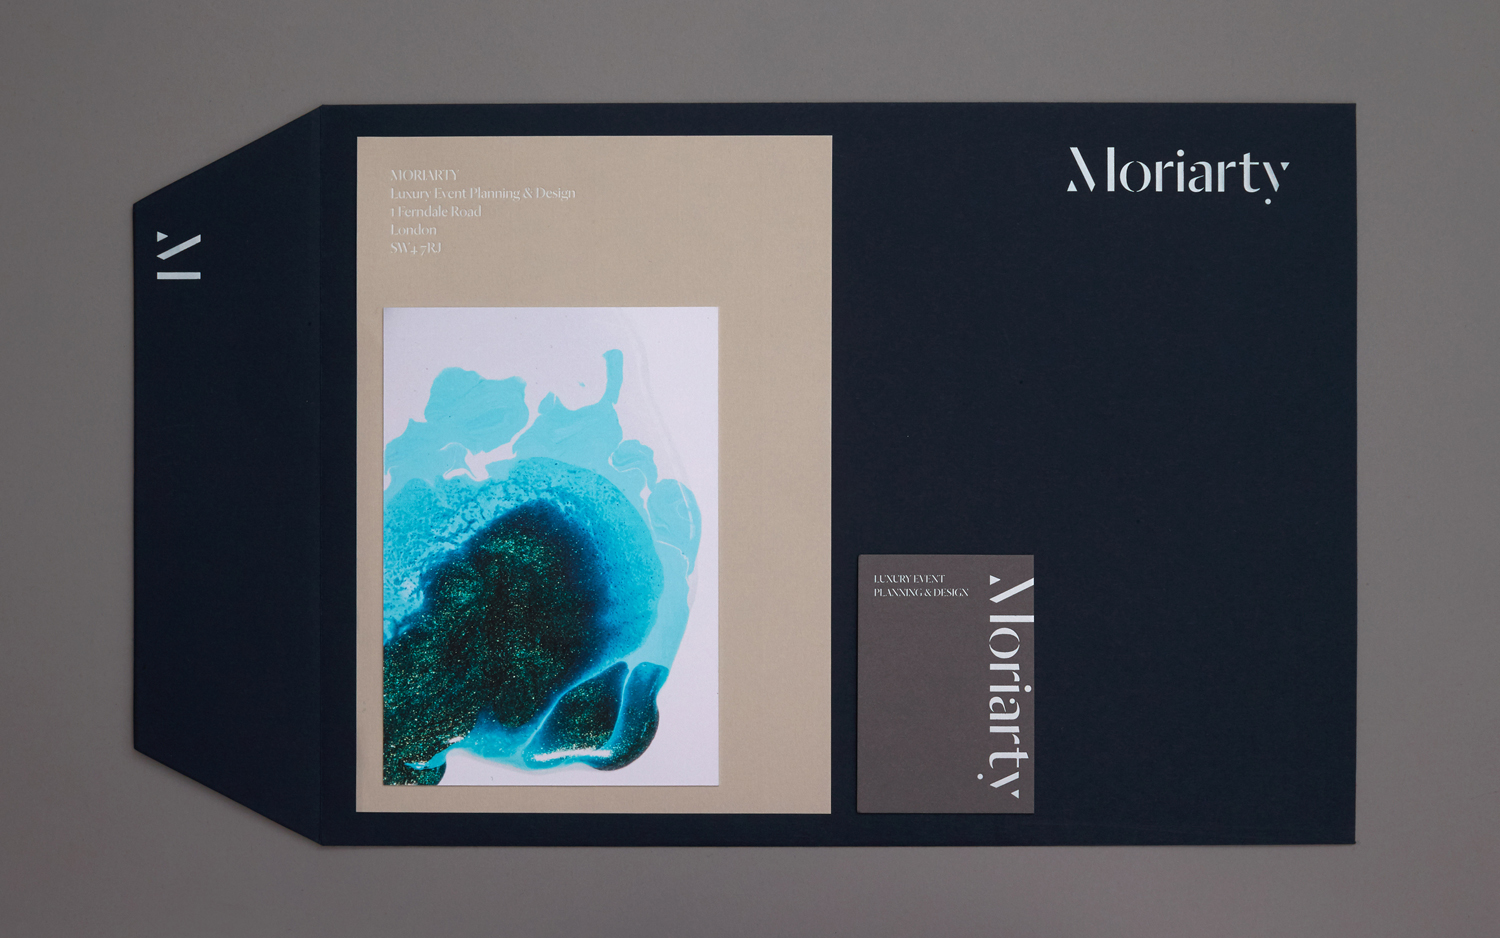 Visual identity designed by Bond for London-based event planning business Moriarty